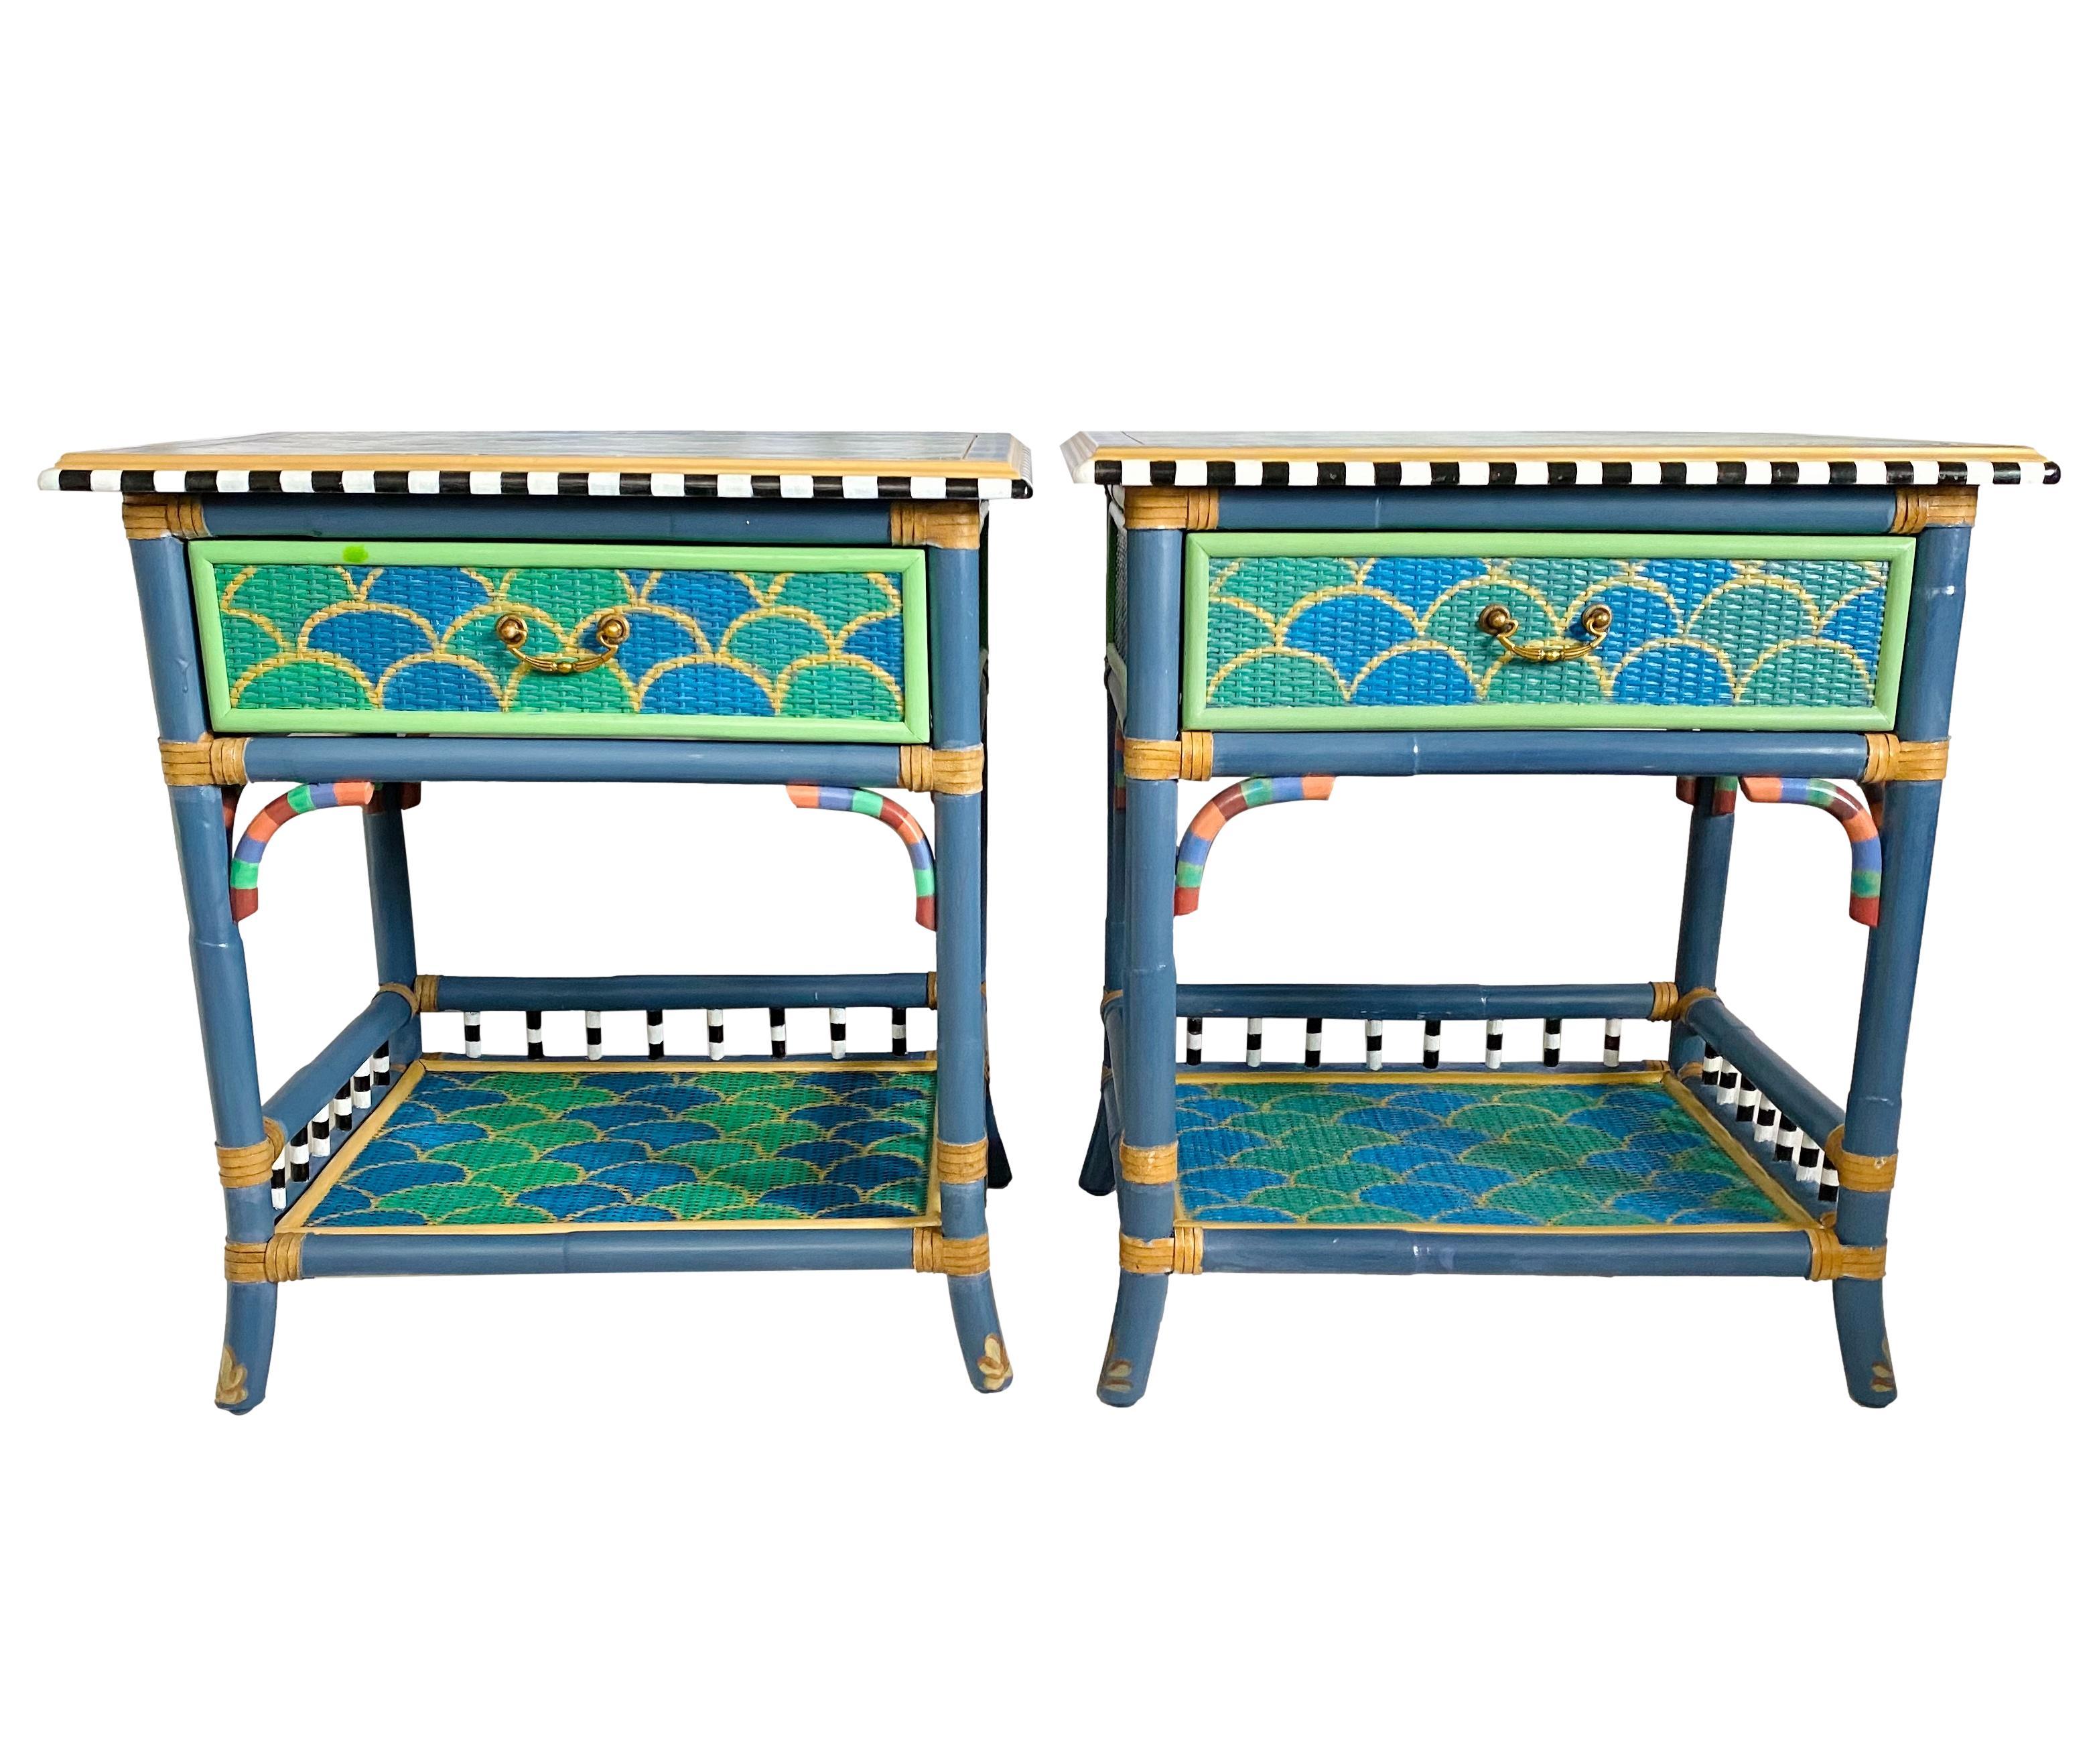 A vintage pair of single-drawer side tables or nightstands hand-painted in the style of MacKenzie-Childs Madras collection. Featuring ogee, tartan, and check patterns in blues, greens, gold, coral, black & white. 

Rattan frames with leather